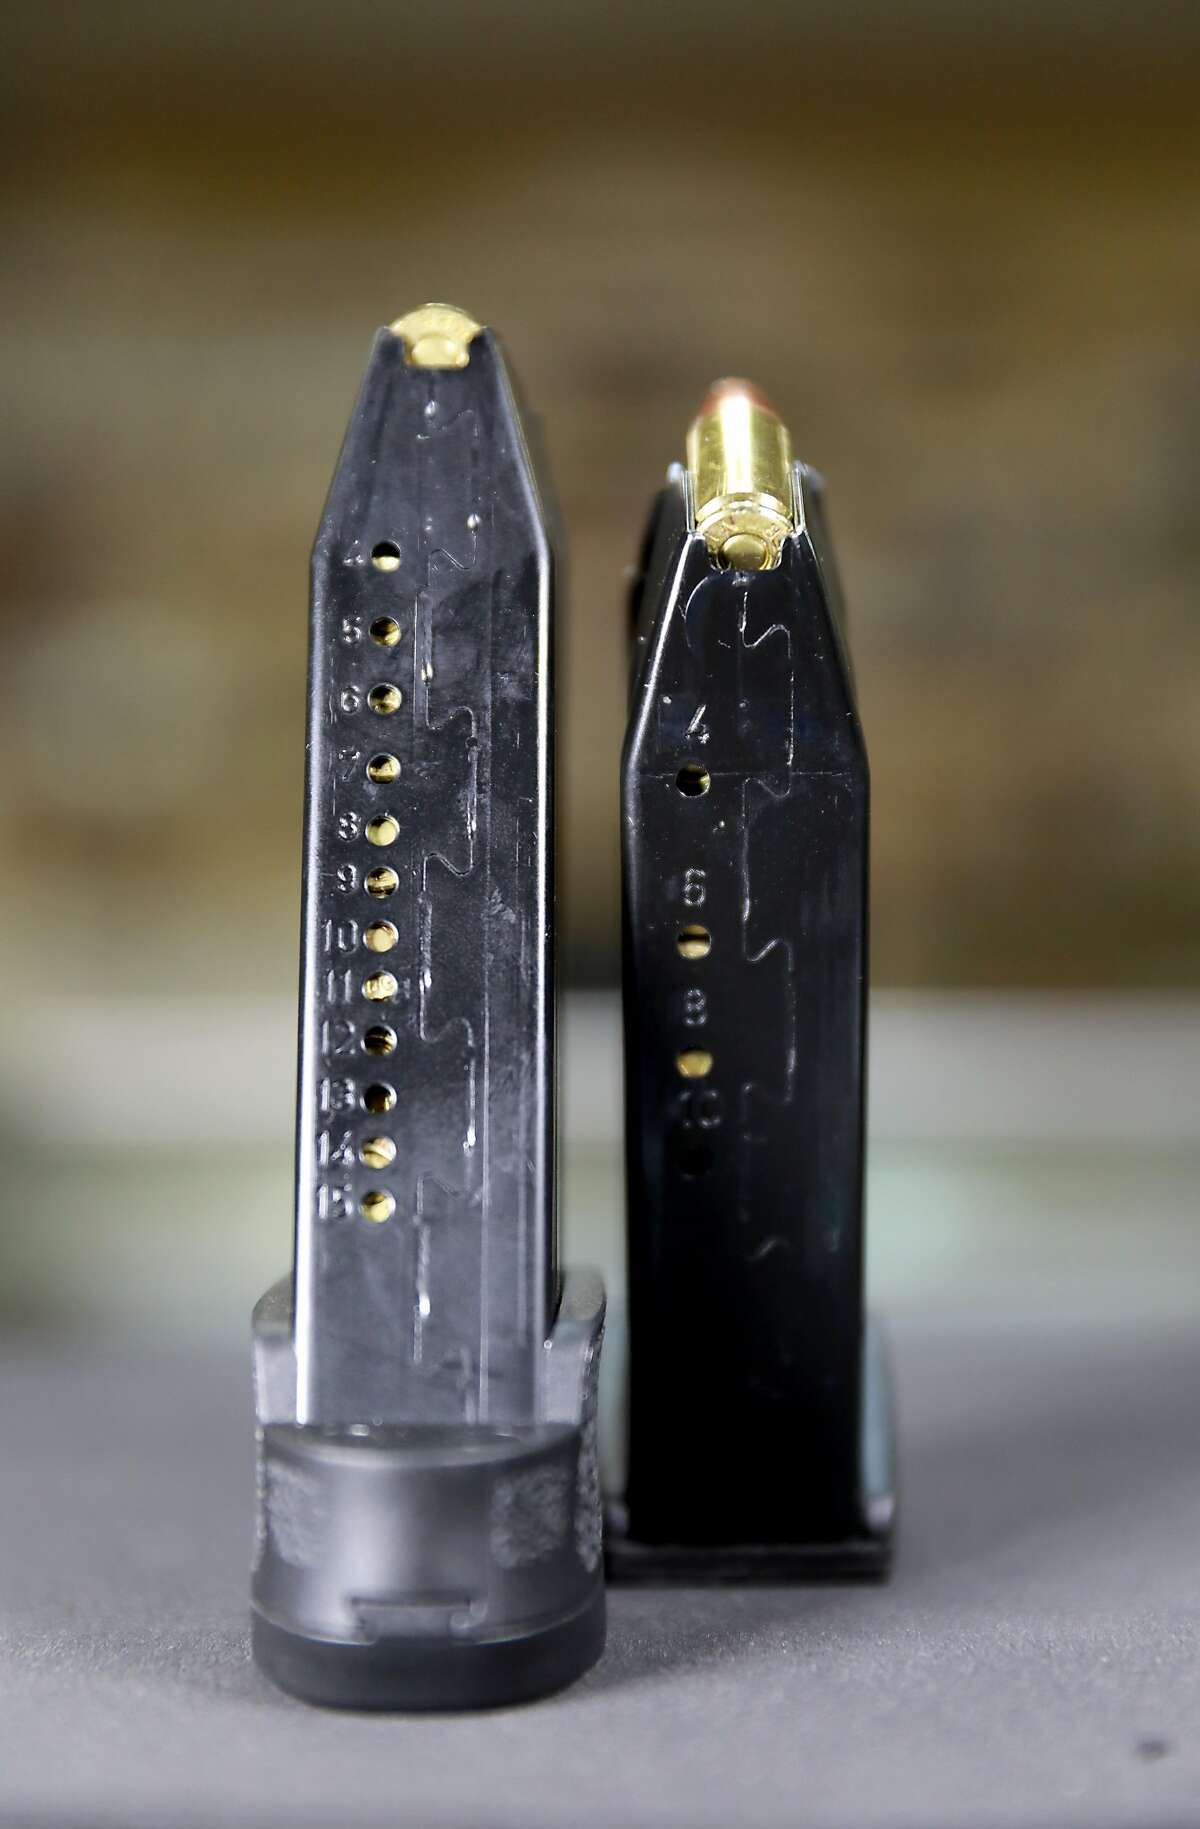 A high capacity magazine (left) has 15 rounds and the magazine to the right has 10 rounds at Coyote Point Armory, in Burlingame, Calif., on Wednesday, April 10, 2019. Last week, a federal judge ruled that California's law banning high capacity magazines (they hold more than 10 rounds) is unconstitutional. For a week, state residents could buy the ammo legally for the first time in California since 2000. But, the judge halted ruling now as it gets appealed.